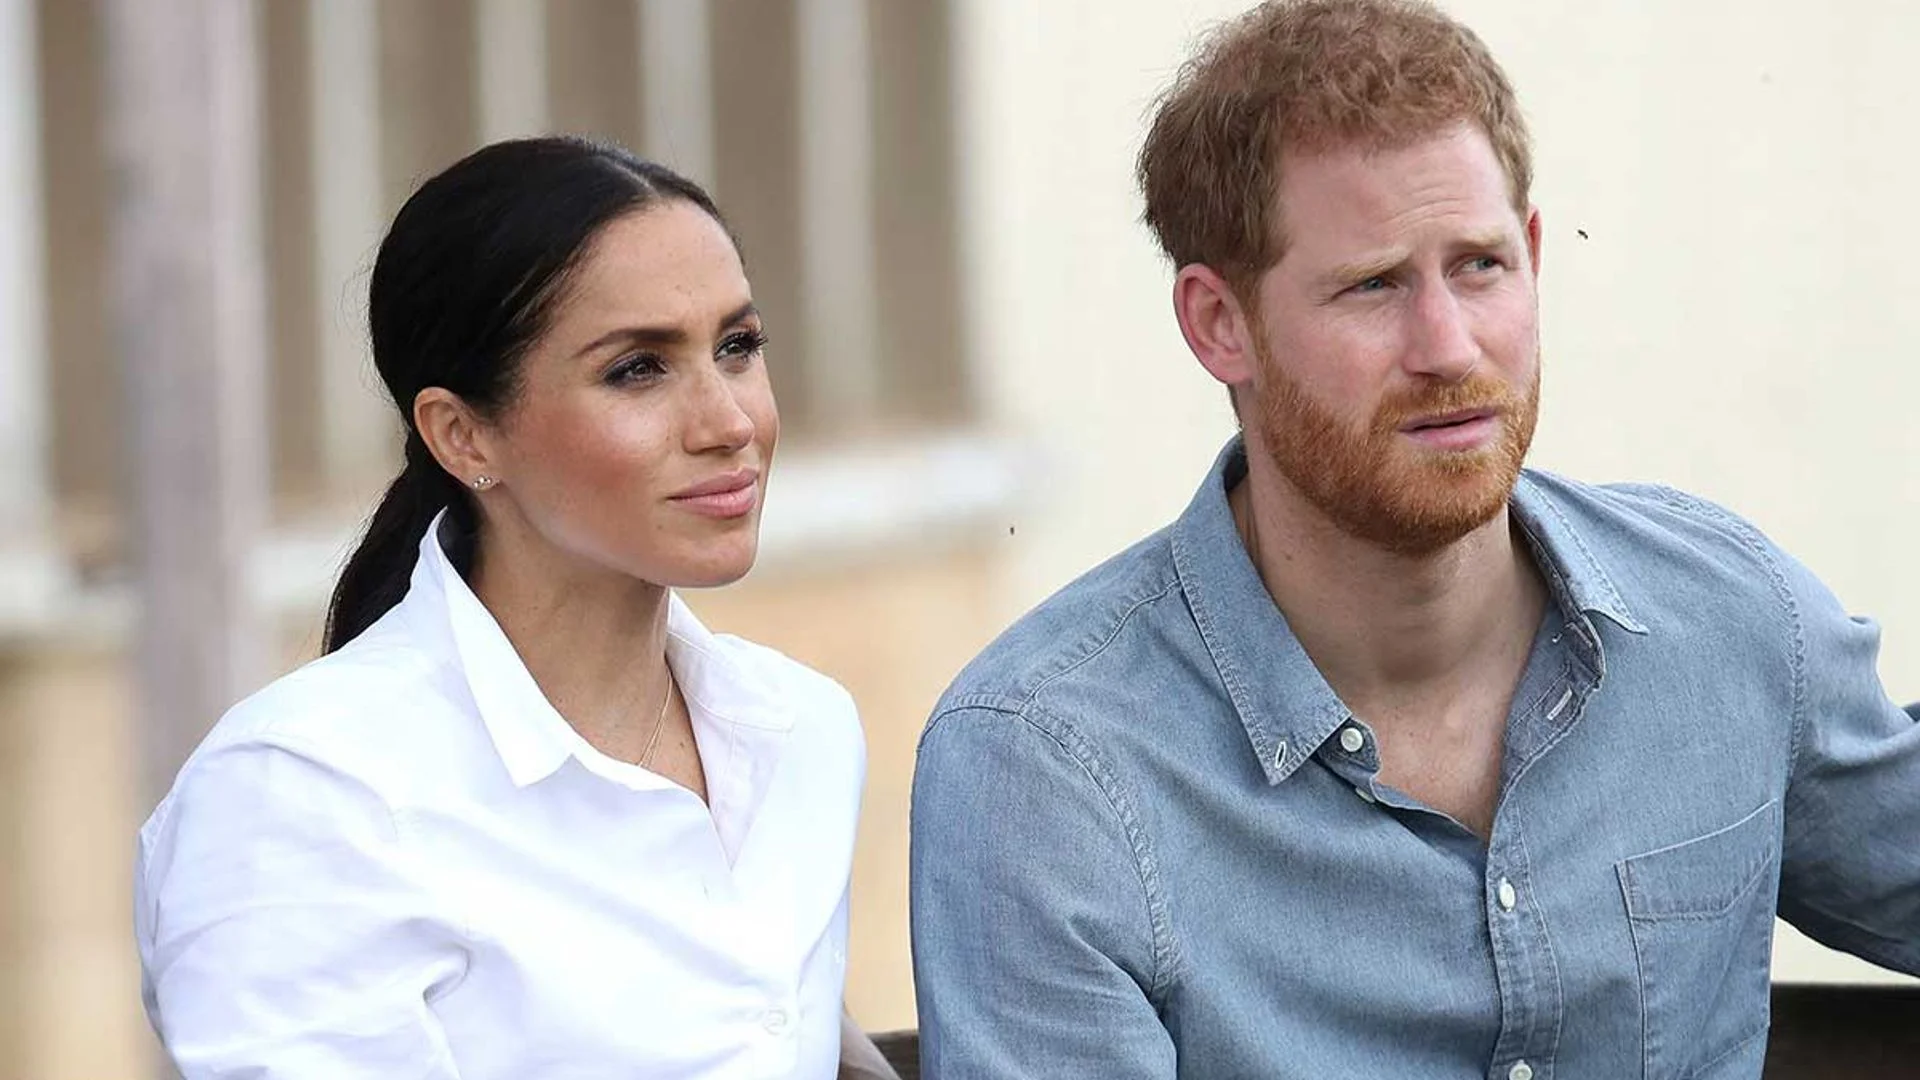 Prince Harry & Meghan Markle’s Montecito Mansion Targeted By Burglars